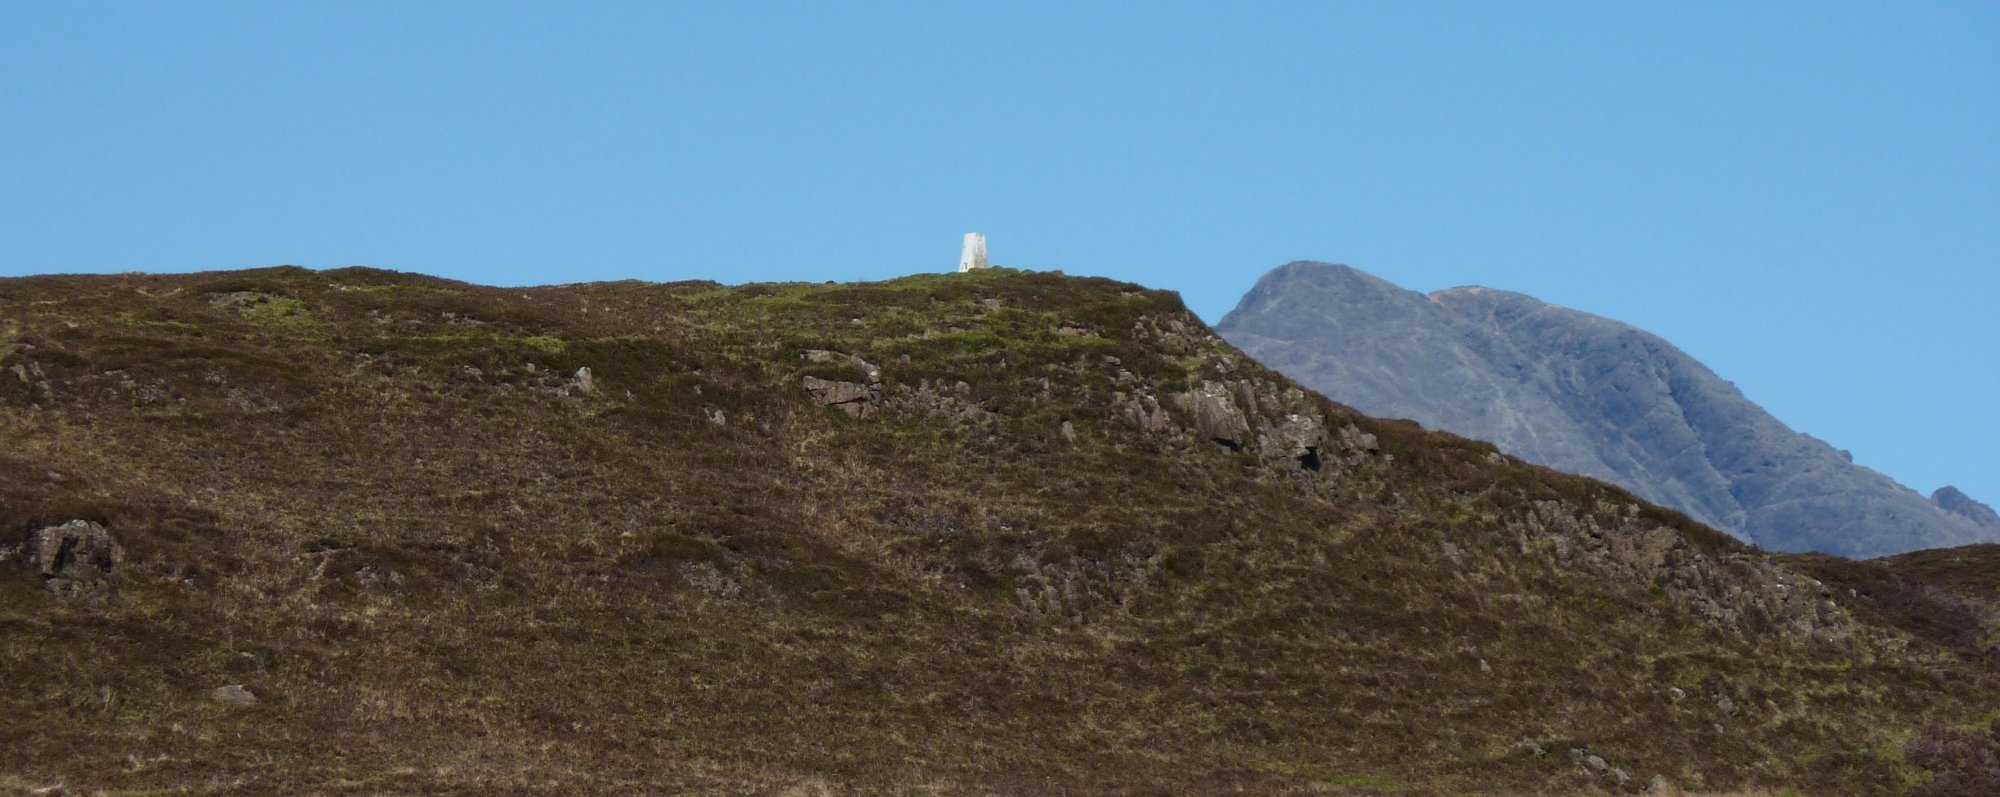 Looking back to Elgol trig point